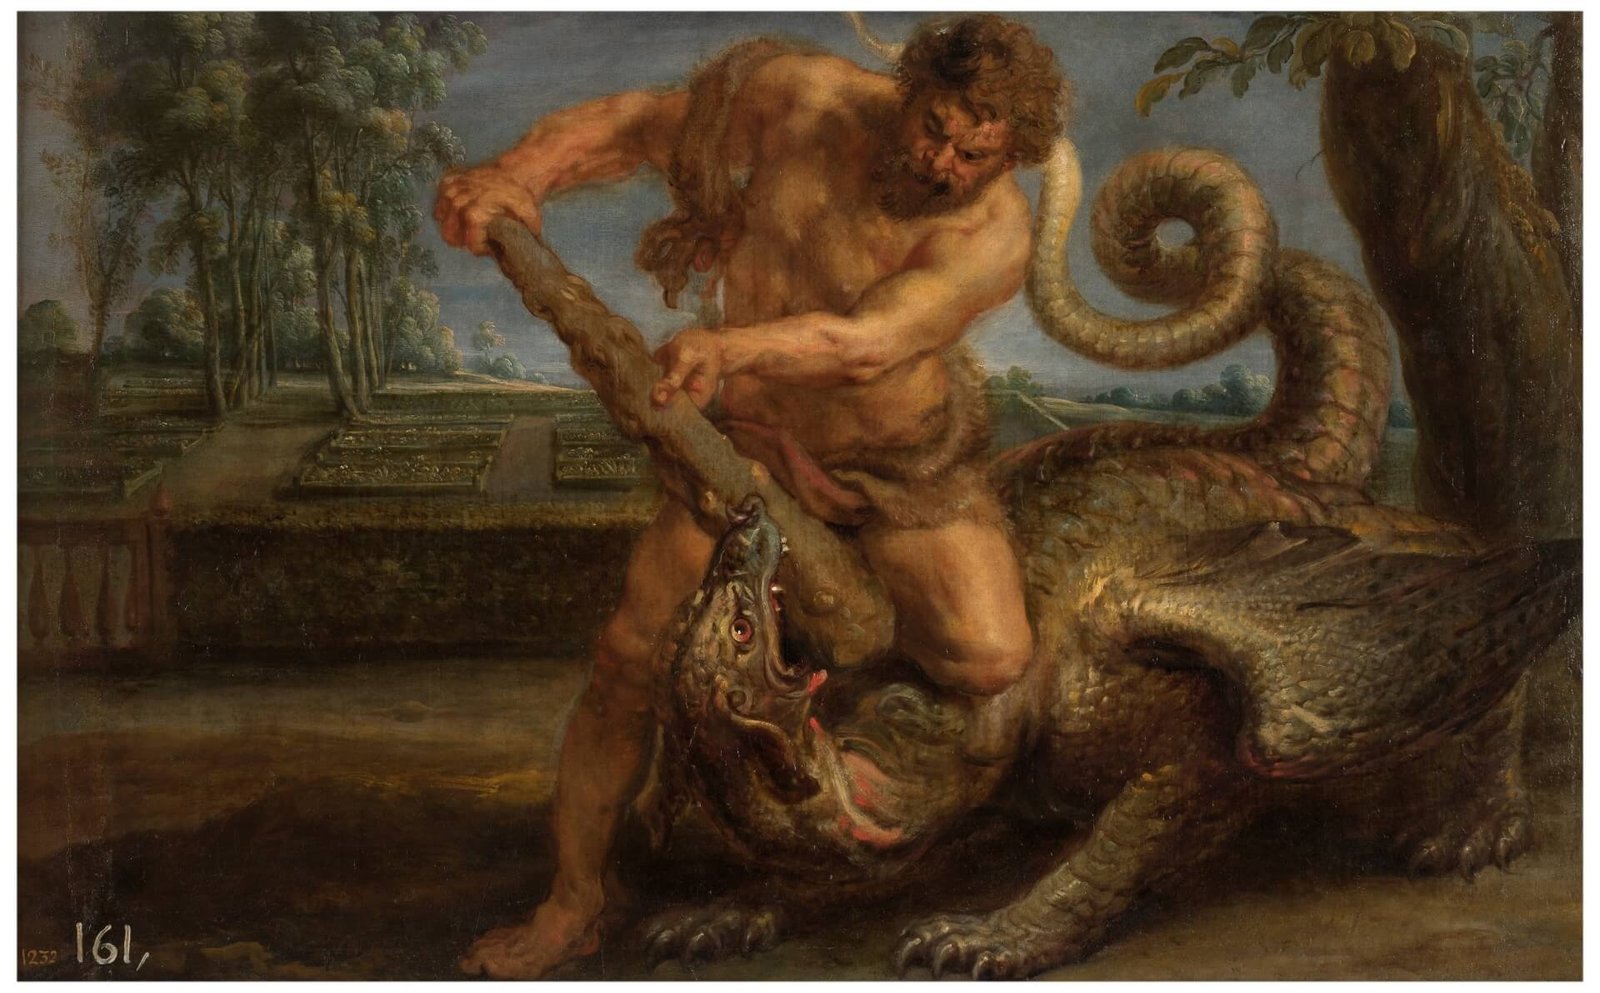 This painting represents athletic middle-aged Hercules killing a dragon in the garden of the Hesperides